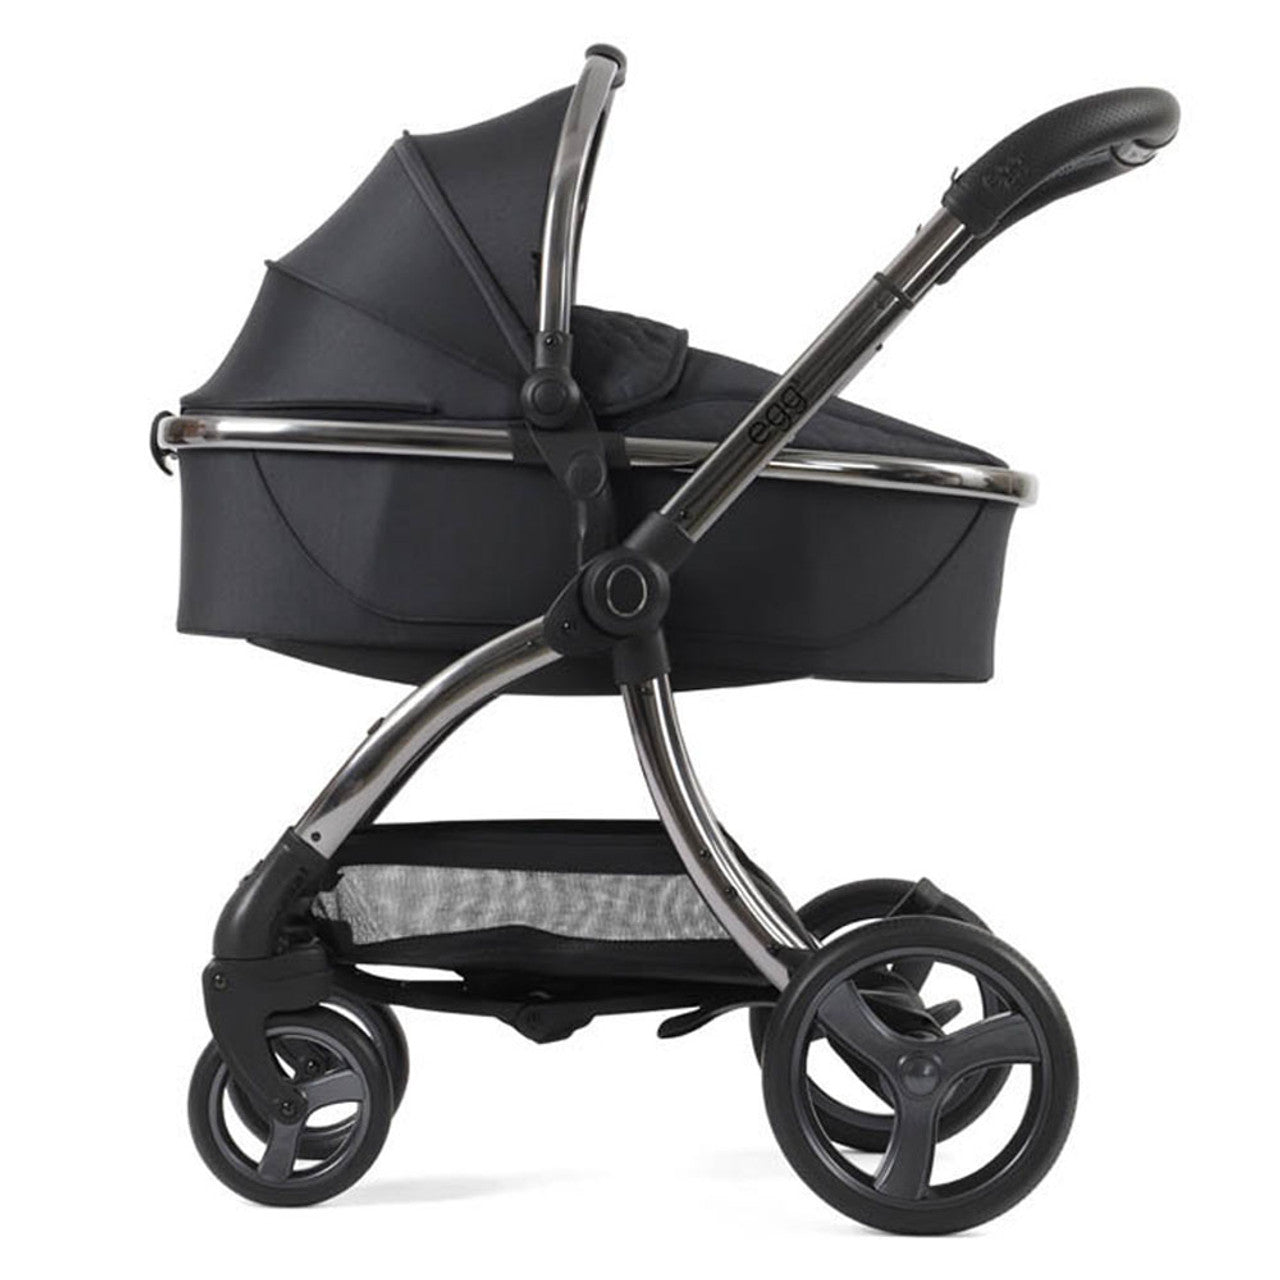 Egg® 3 Luxury Shell i-Size Travel System Bundle - Carbonite -  | For Your Little One